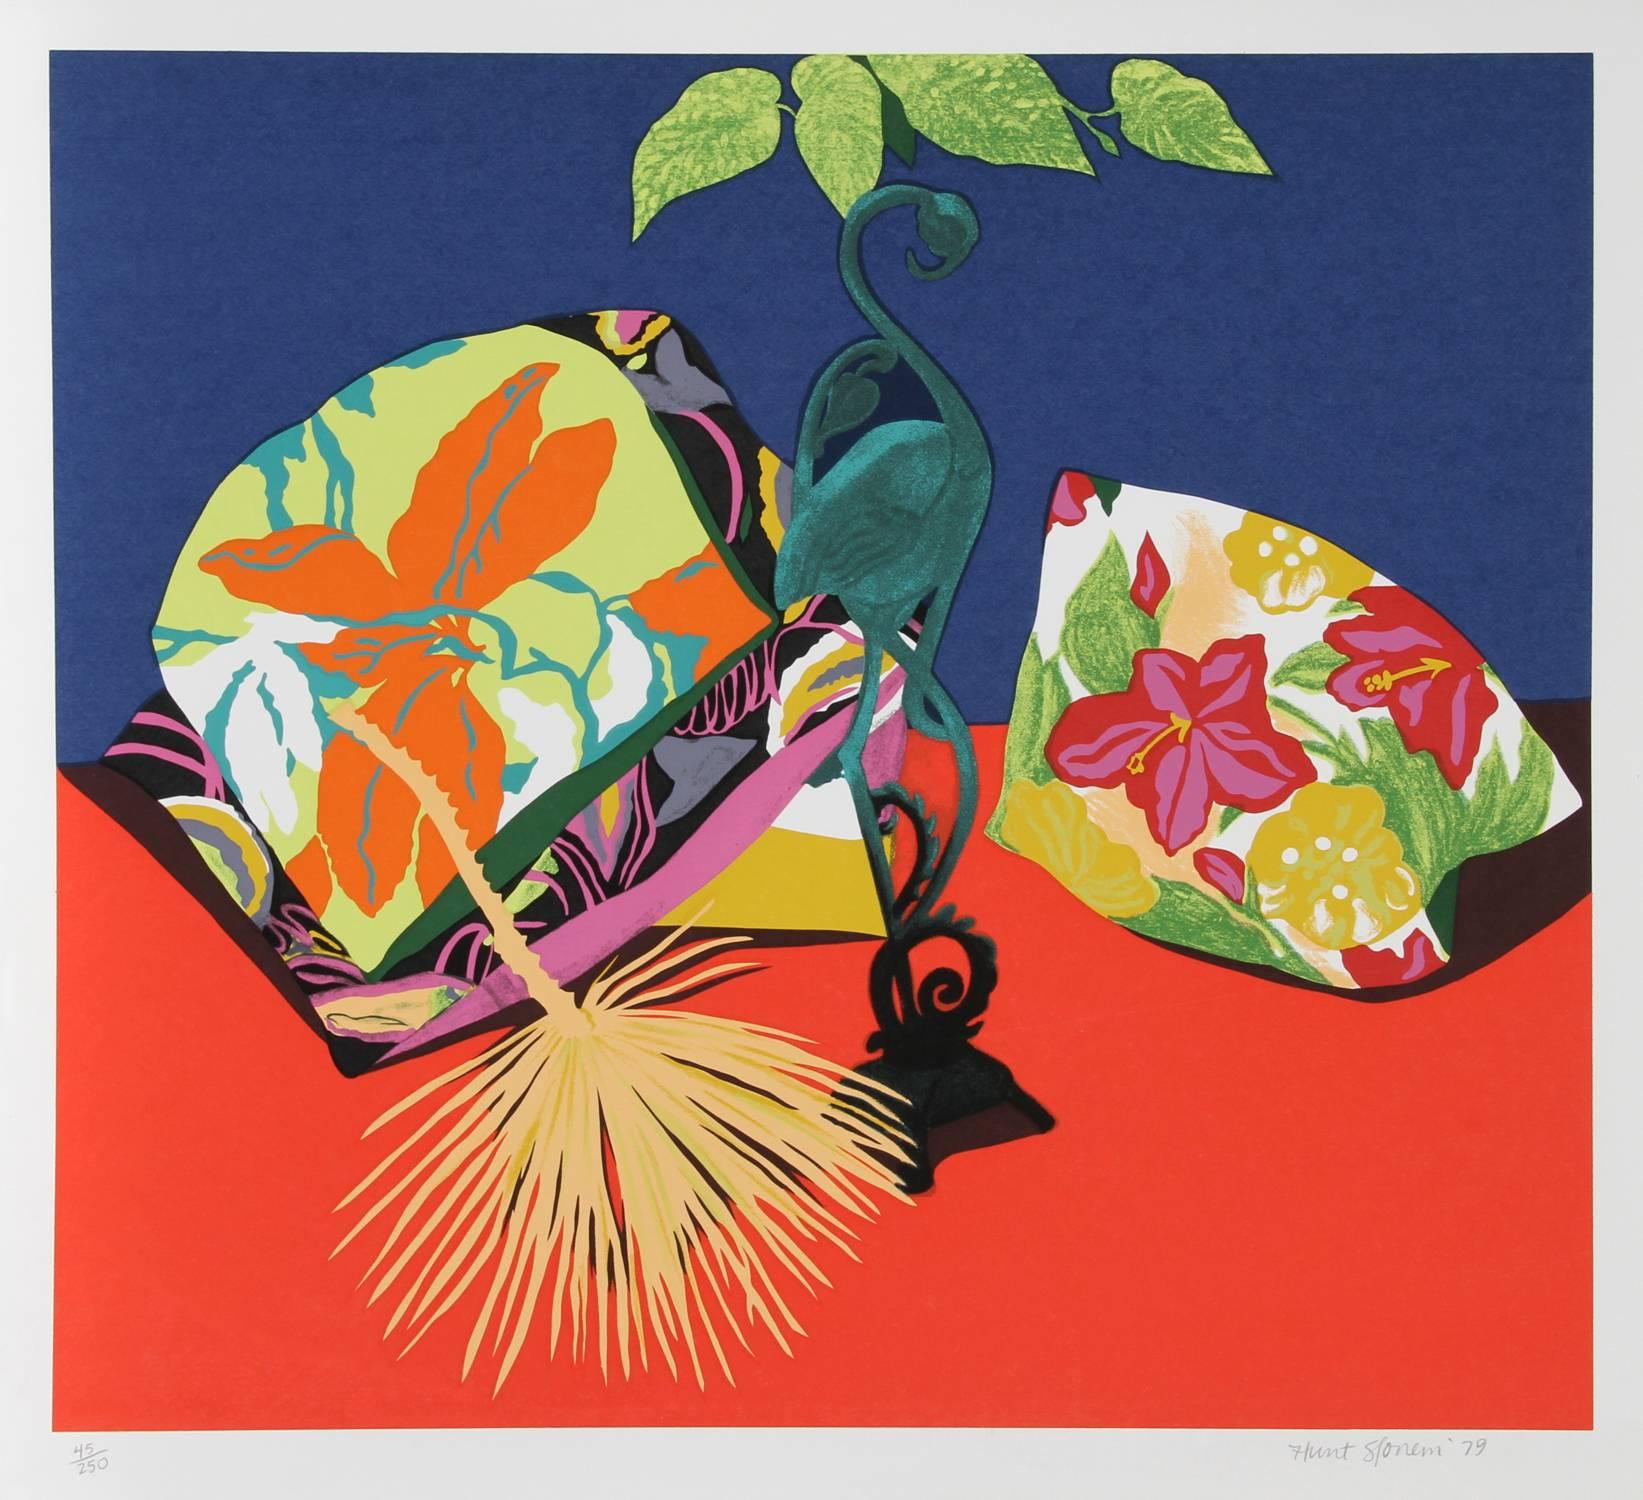 Artist: Hunt Slonem, American (1951 - )
Title: Iron Flamingo
Year: 1979
Medium: Serigraph, signed and numbered in pencil
Edition: 250, AP 30
Size: 26 in. x 29 in. (66.04 cm x 73.66 cm)